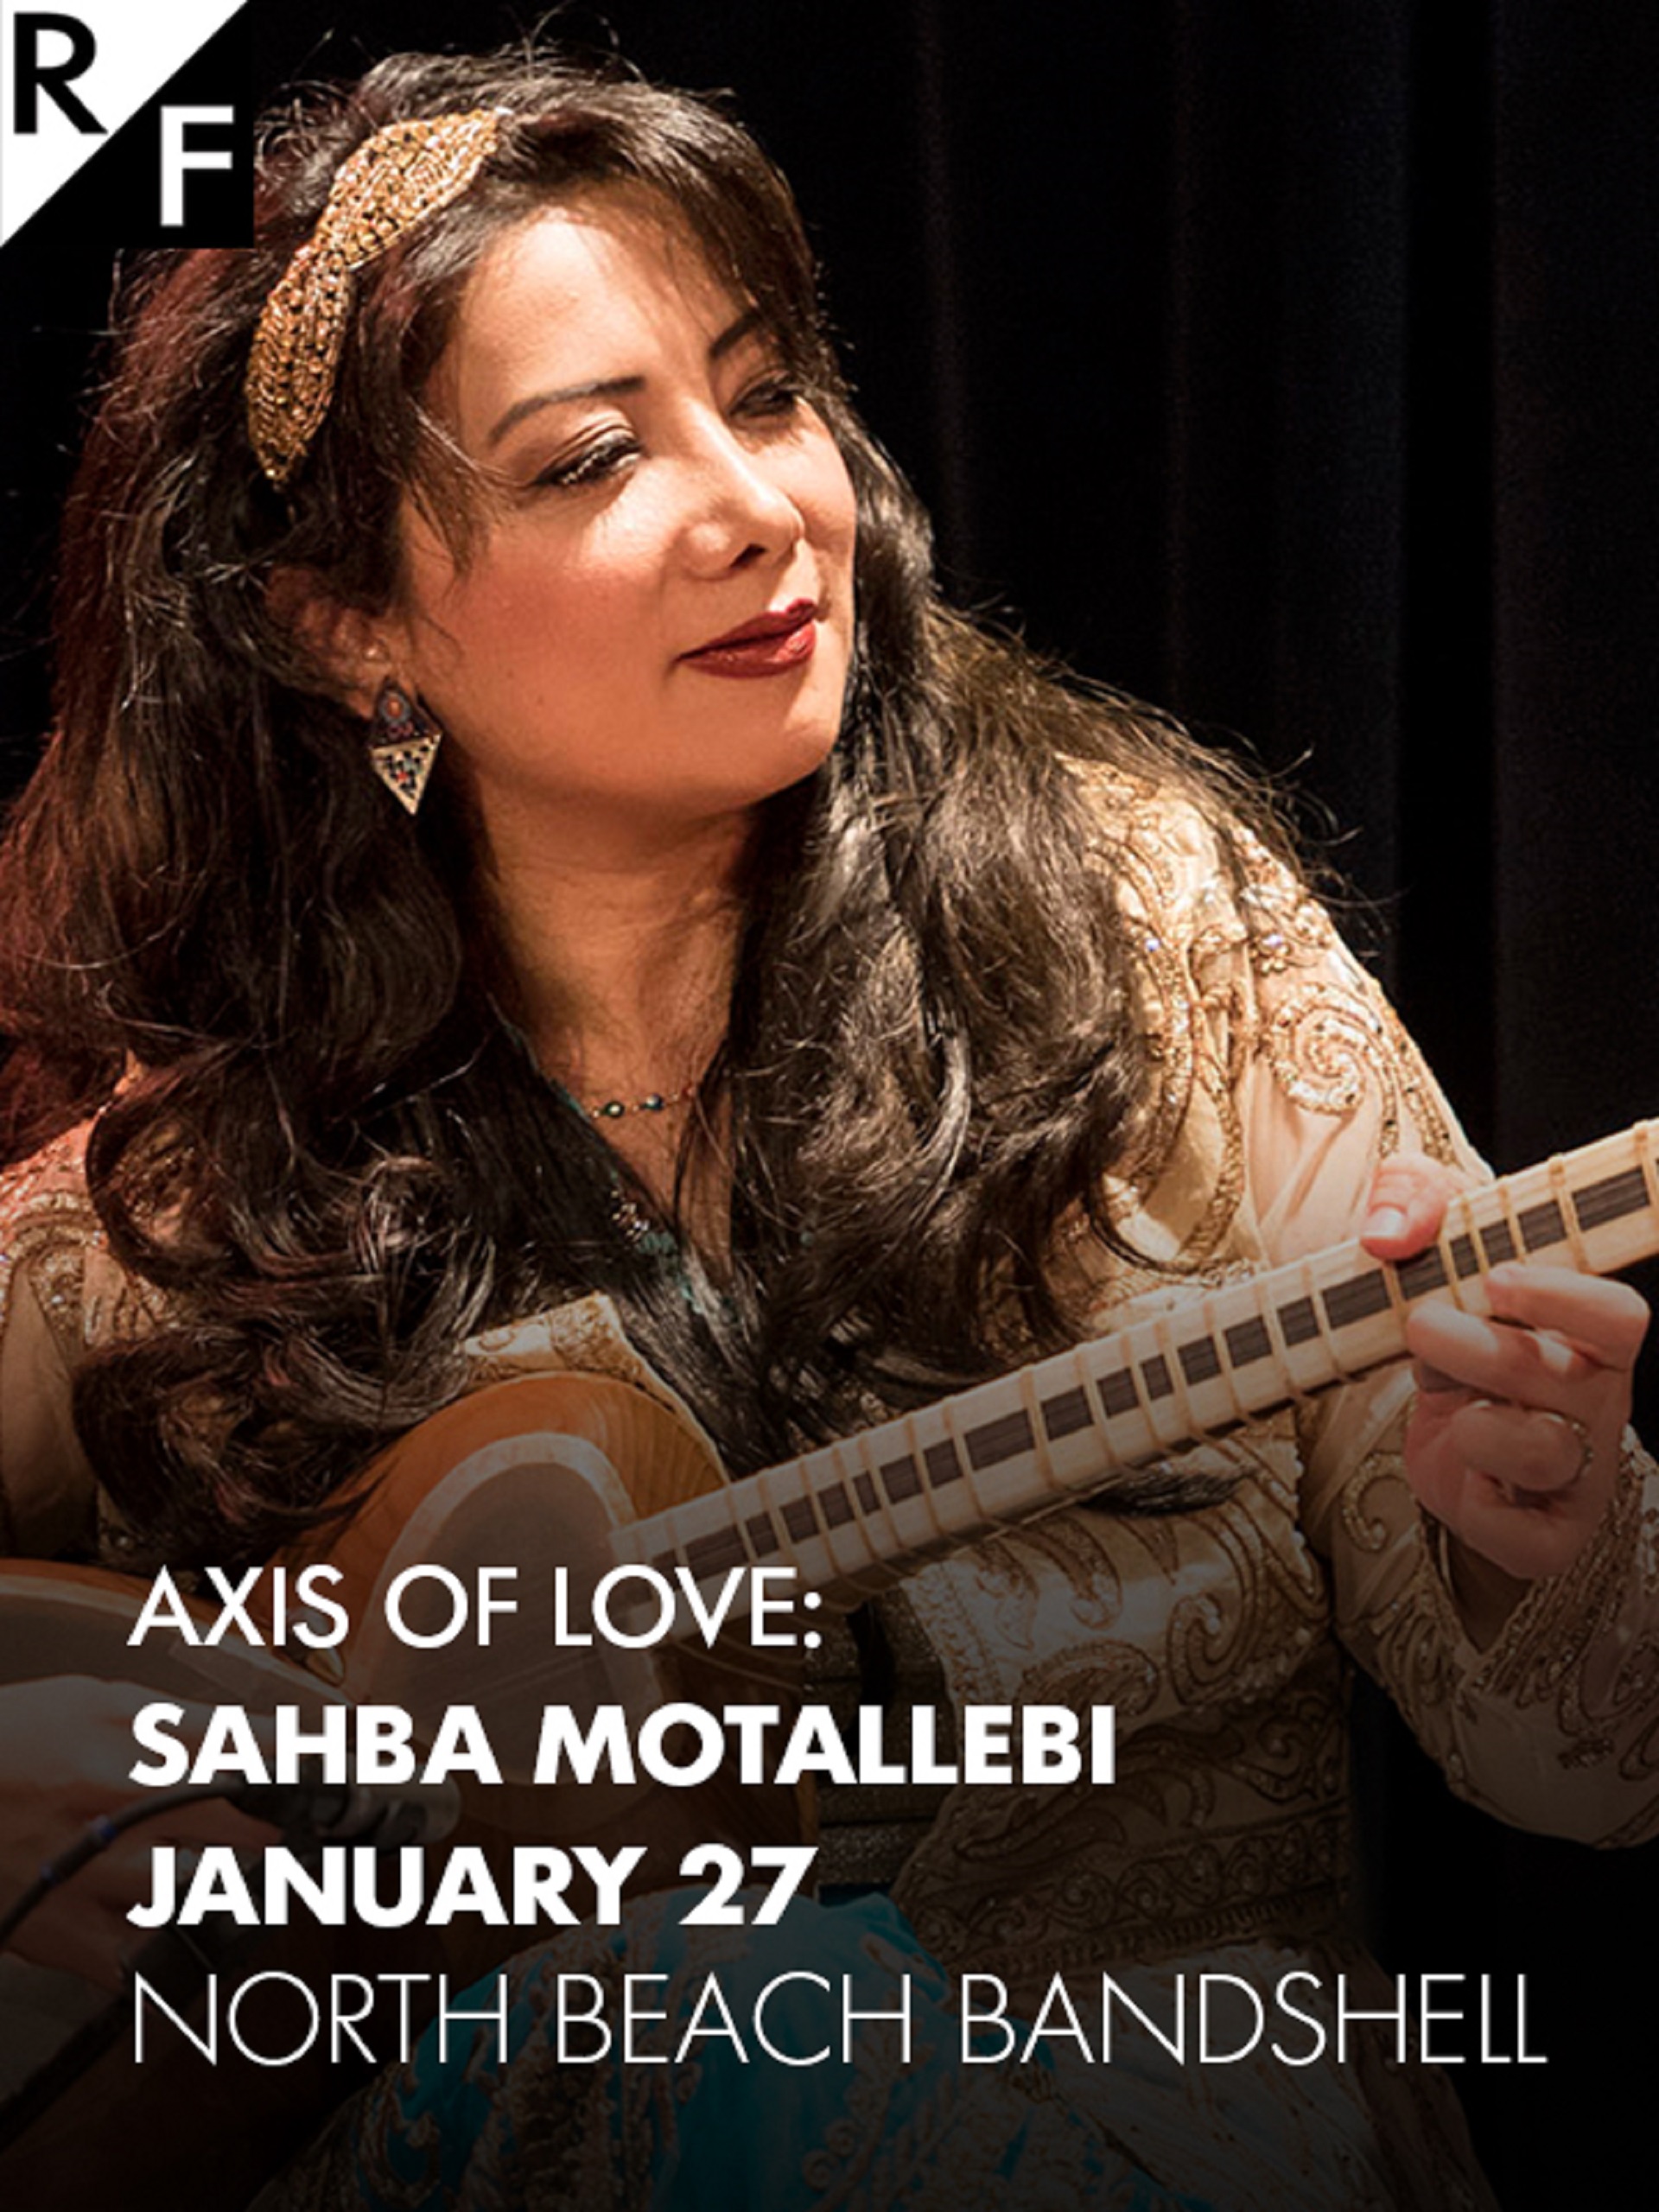 Axis of Love with Sahba Motallebi on January 27th